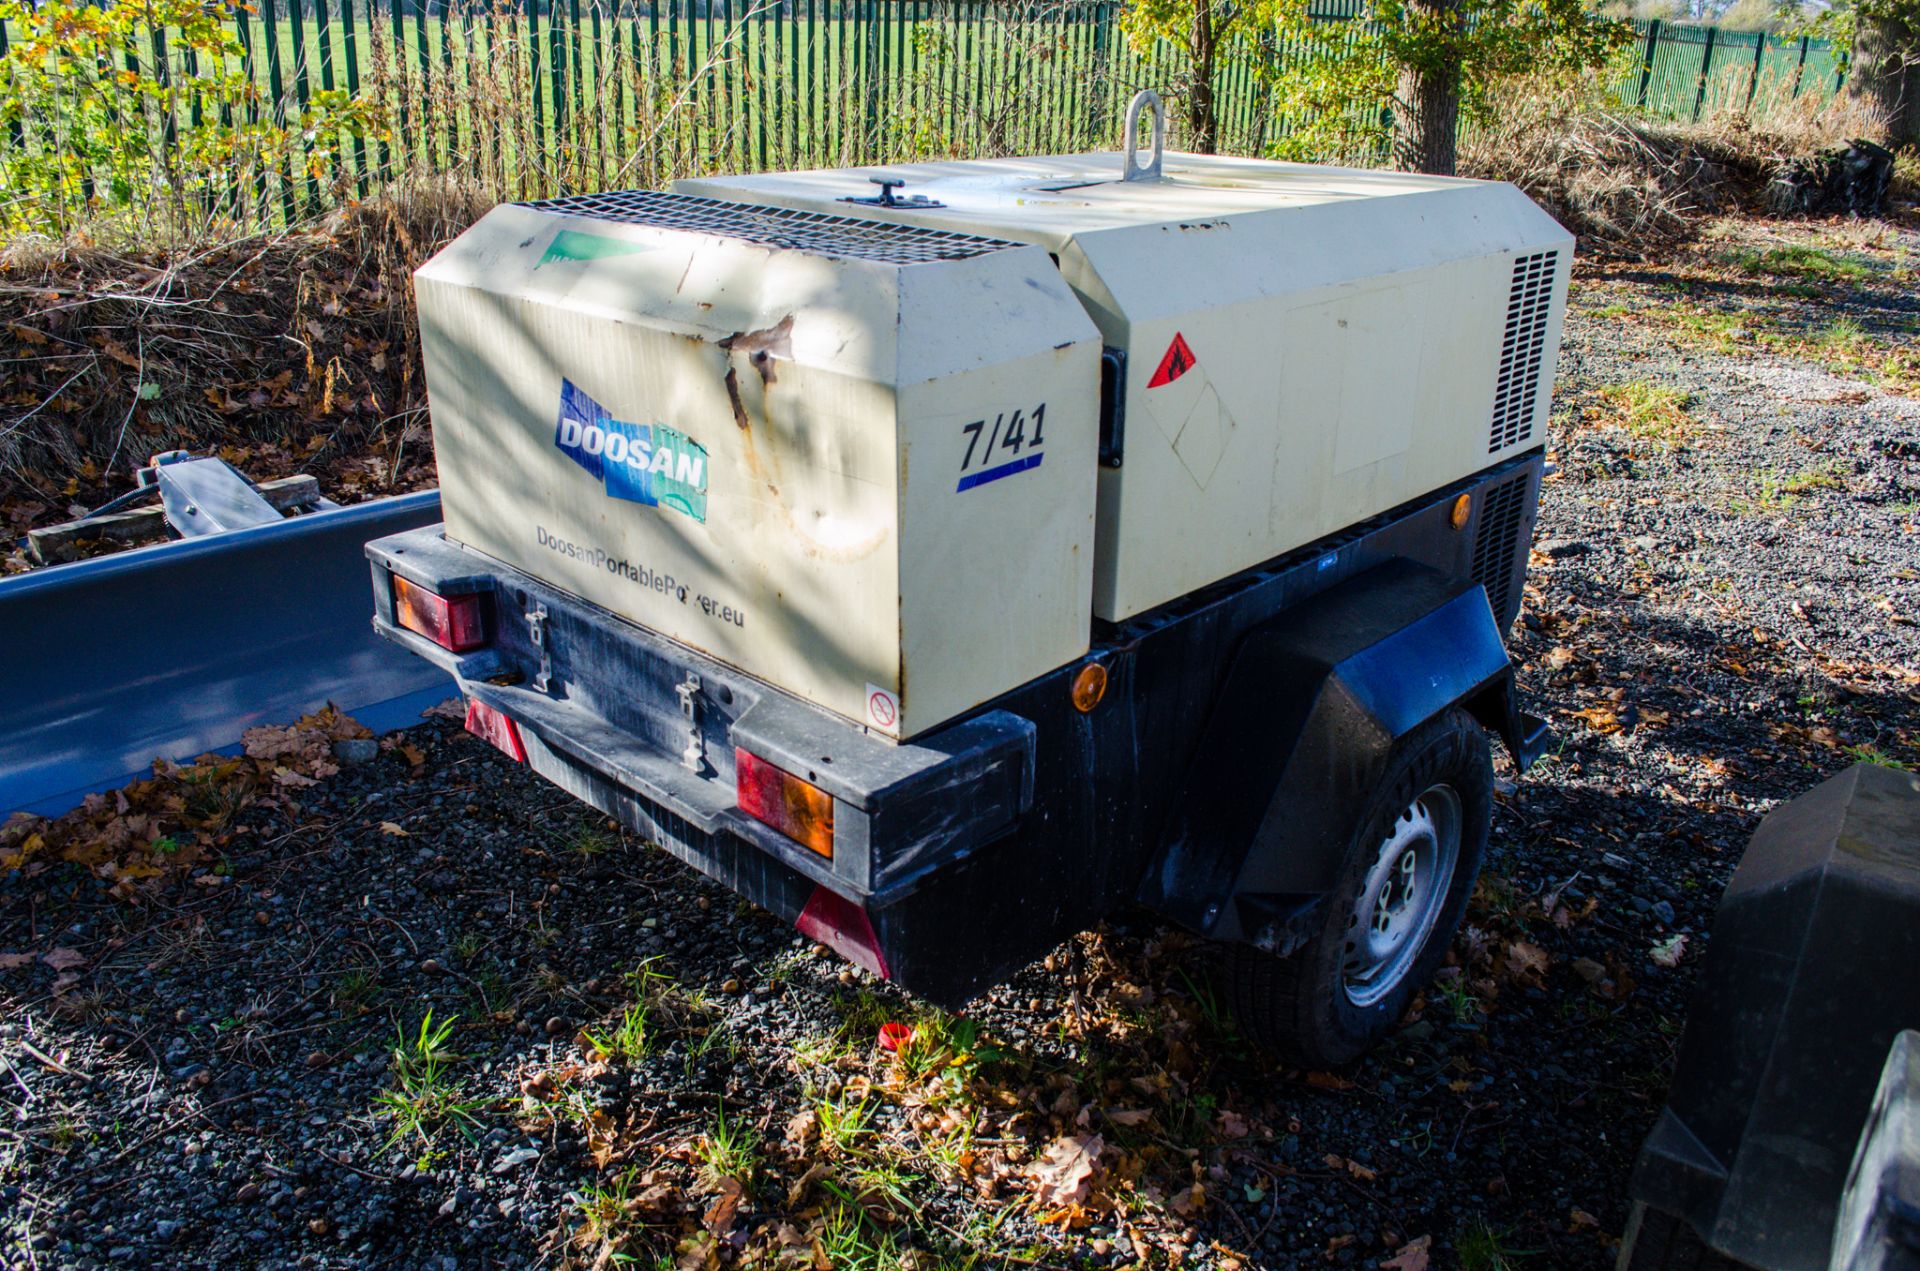 Doosan 7/41 diesel driven fast tow air compressor Year: 2016 S/N: 434195 Recorded hours: 1032 - Image 2 of 6